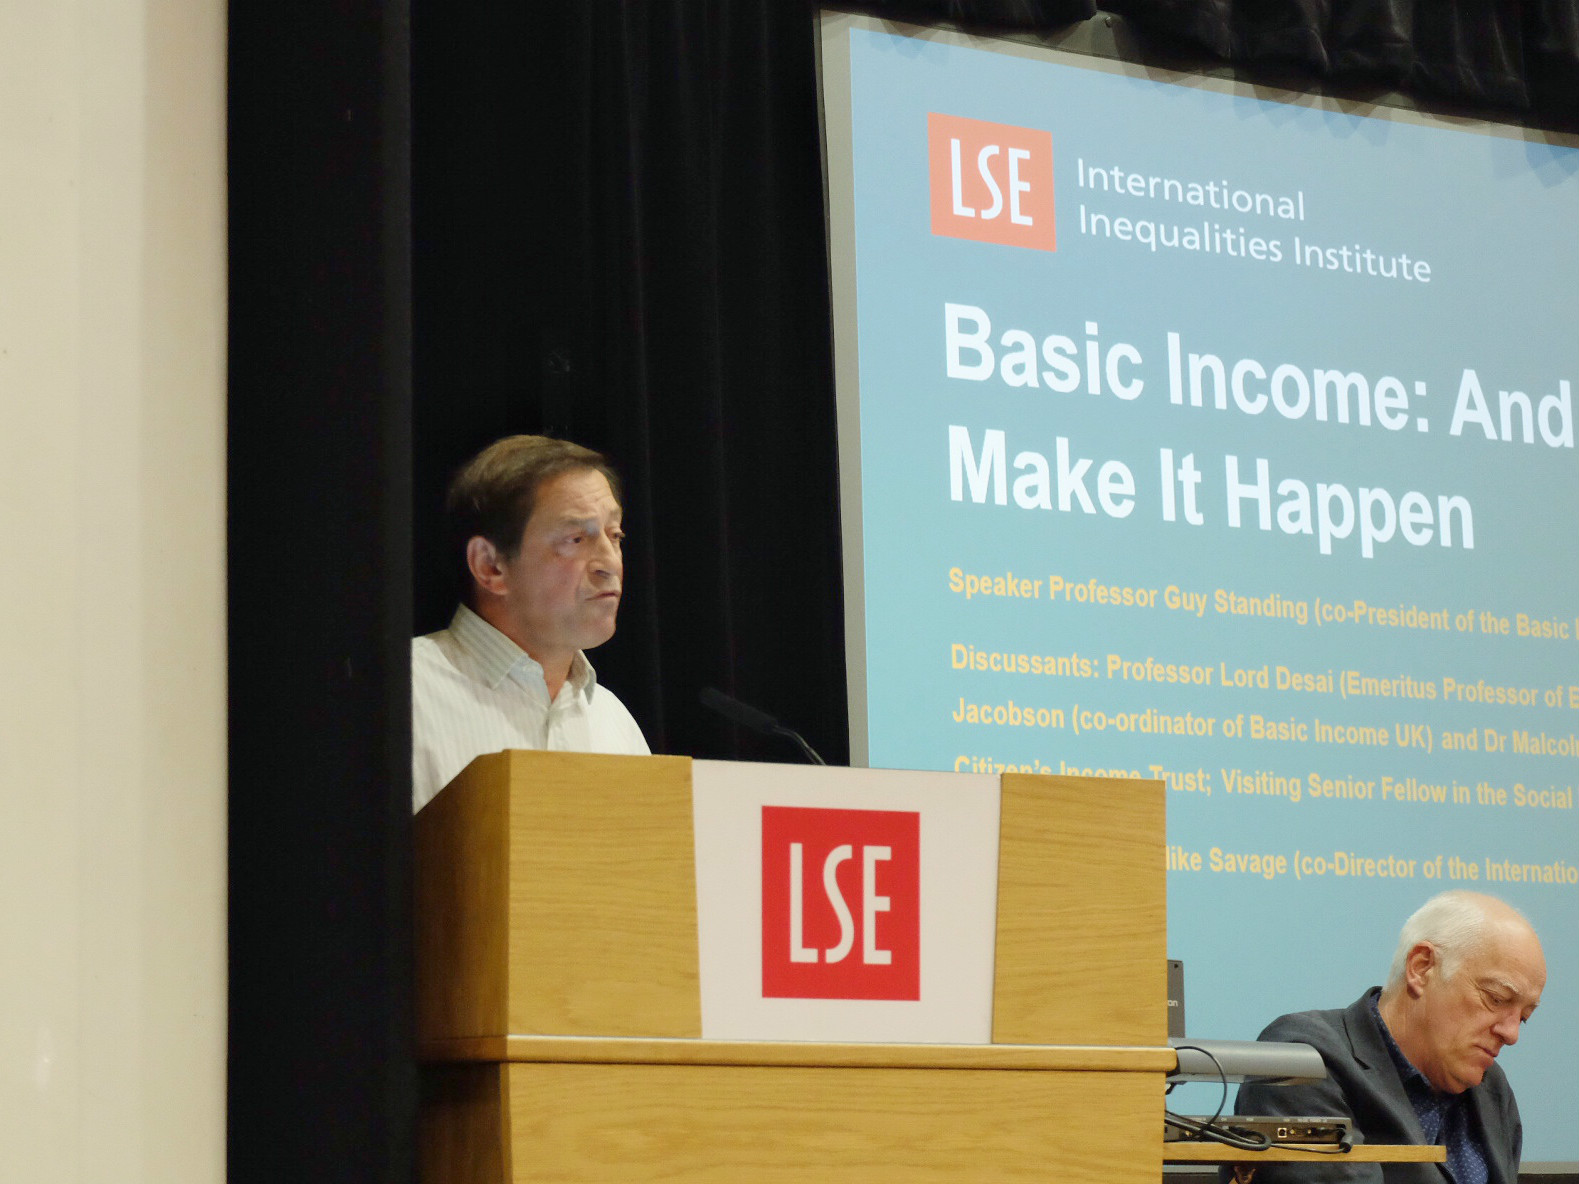 Basic Income: and how we can make it happen